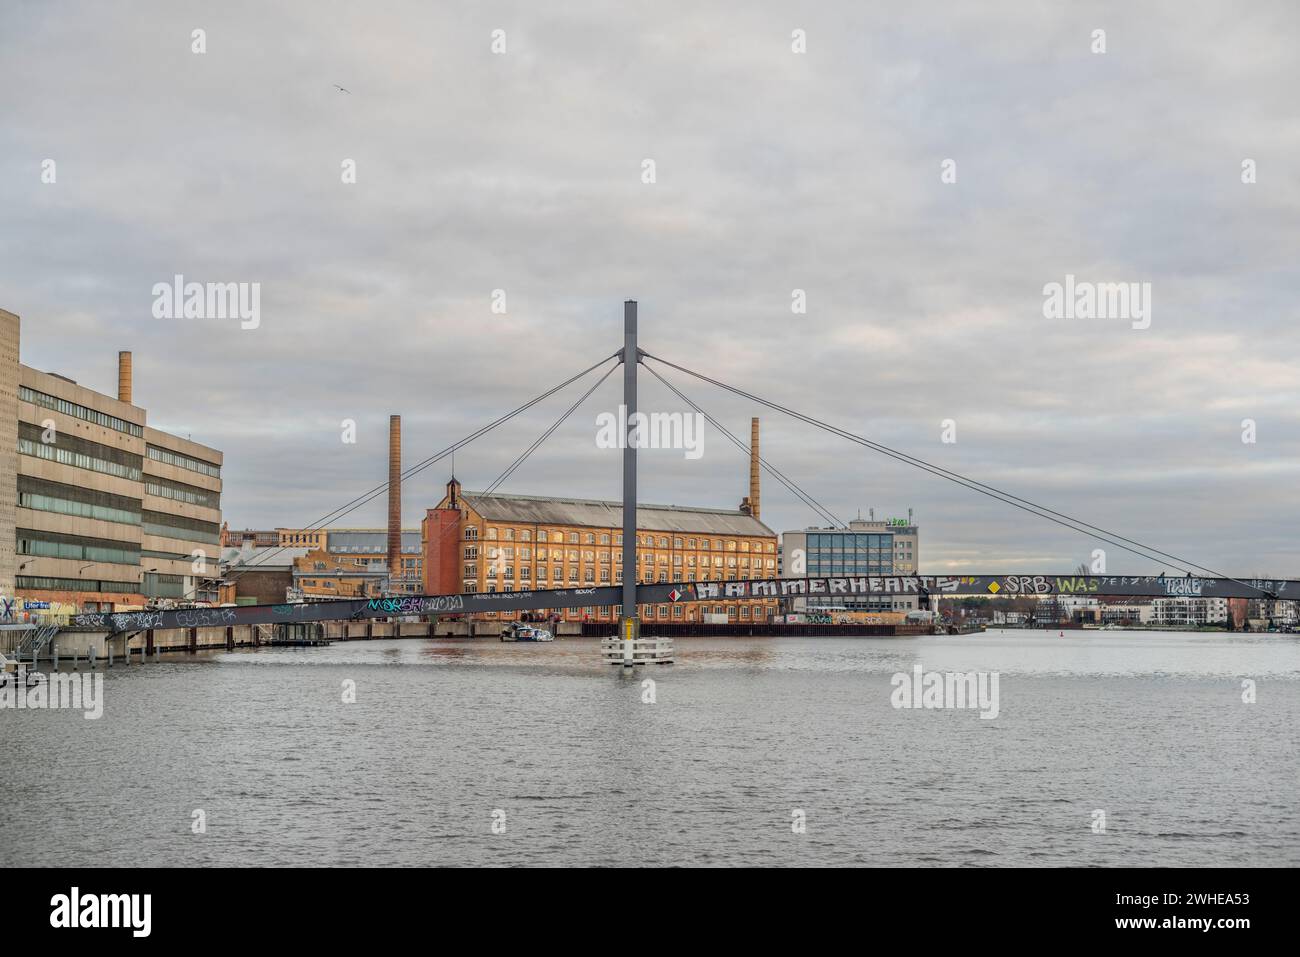 The former KWO (Kabelwerk Oberspree) listed building and the Kaisersteg Brucke in the foreground on a cloudy day, Treptow - Koepenick, Berlin, Germany Stock Photo